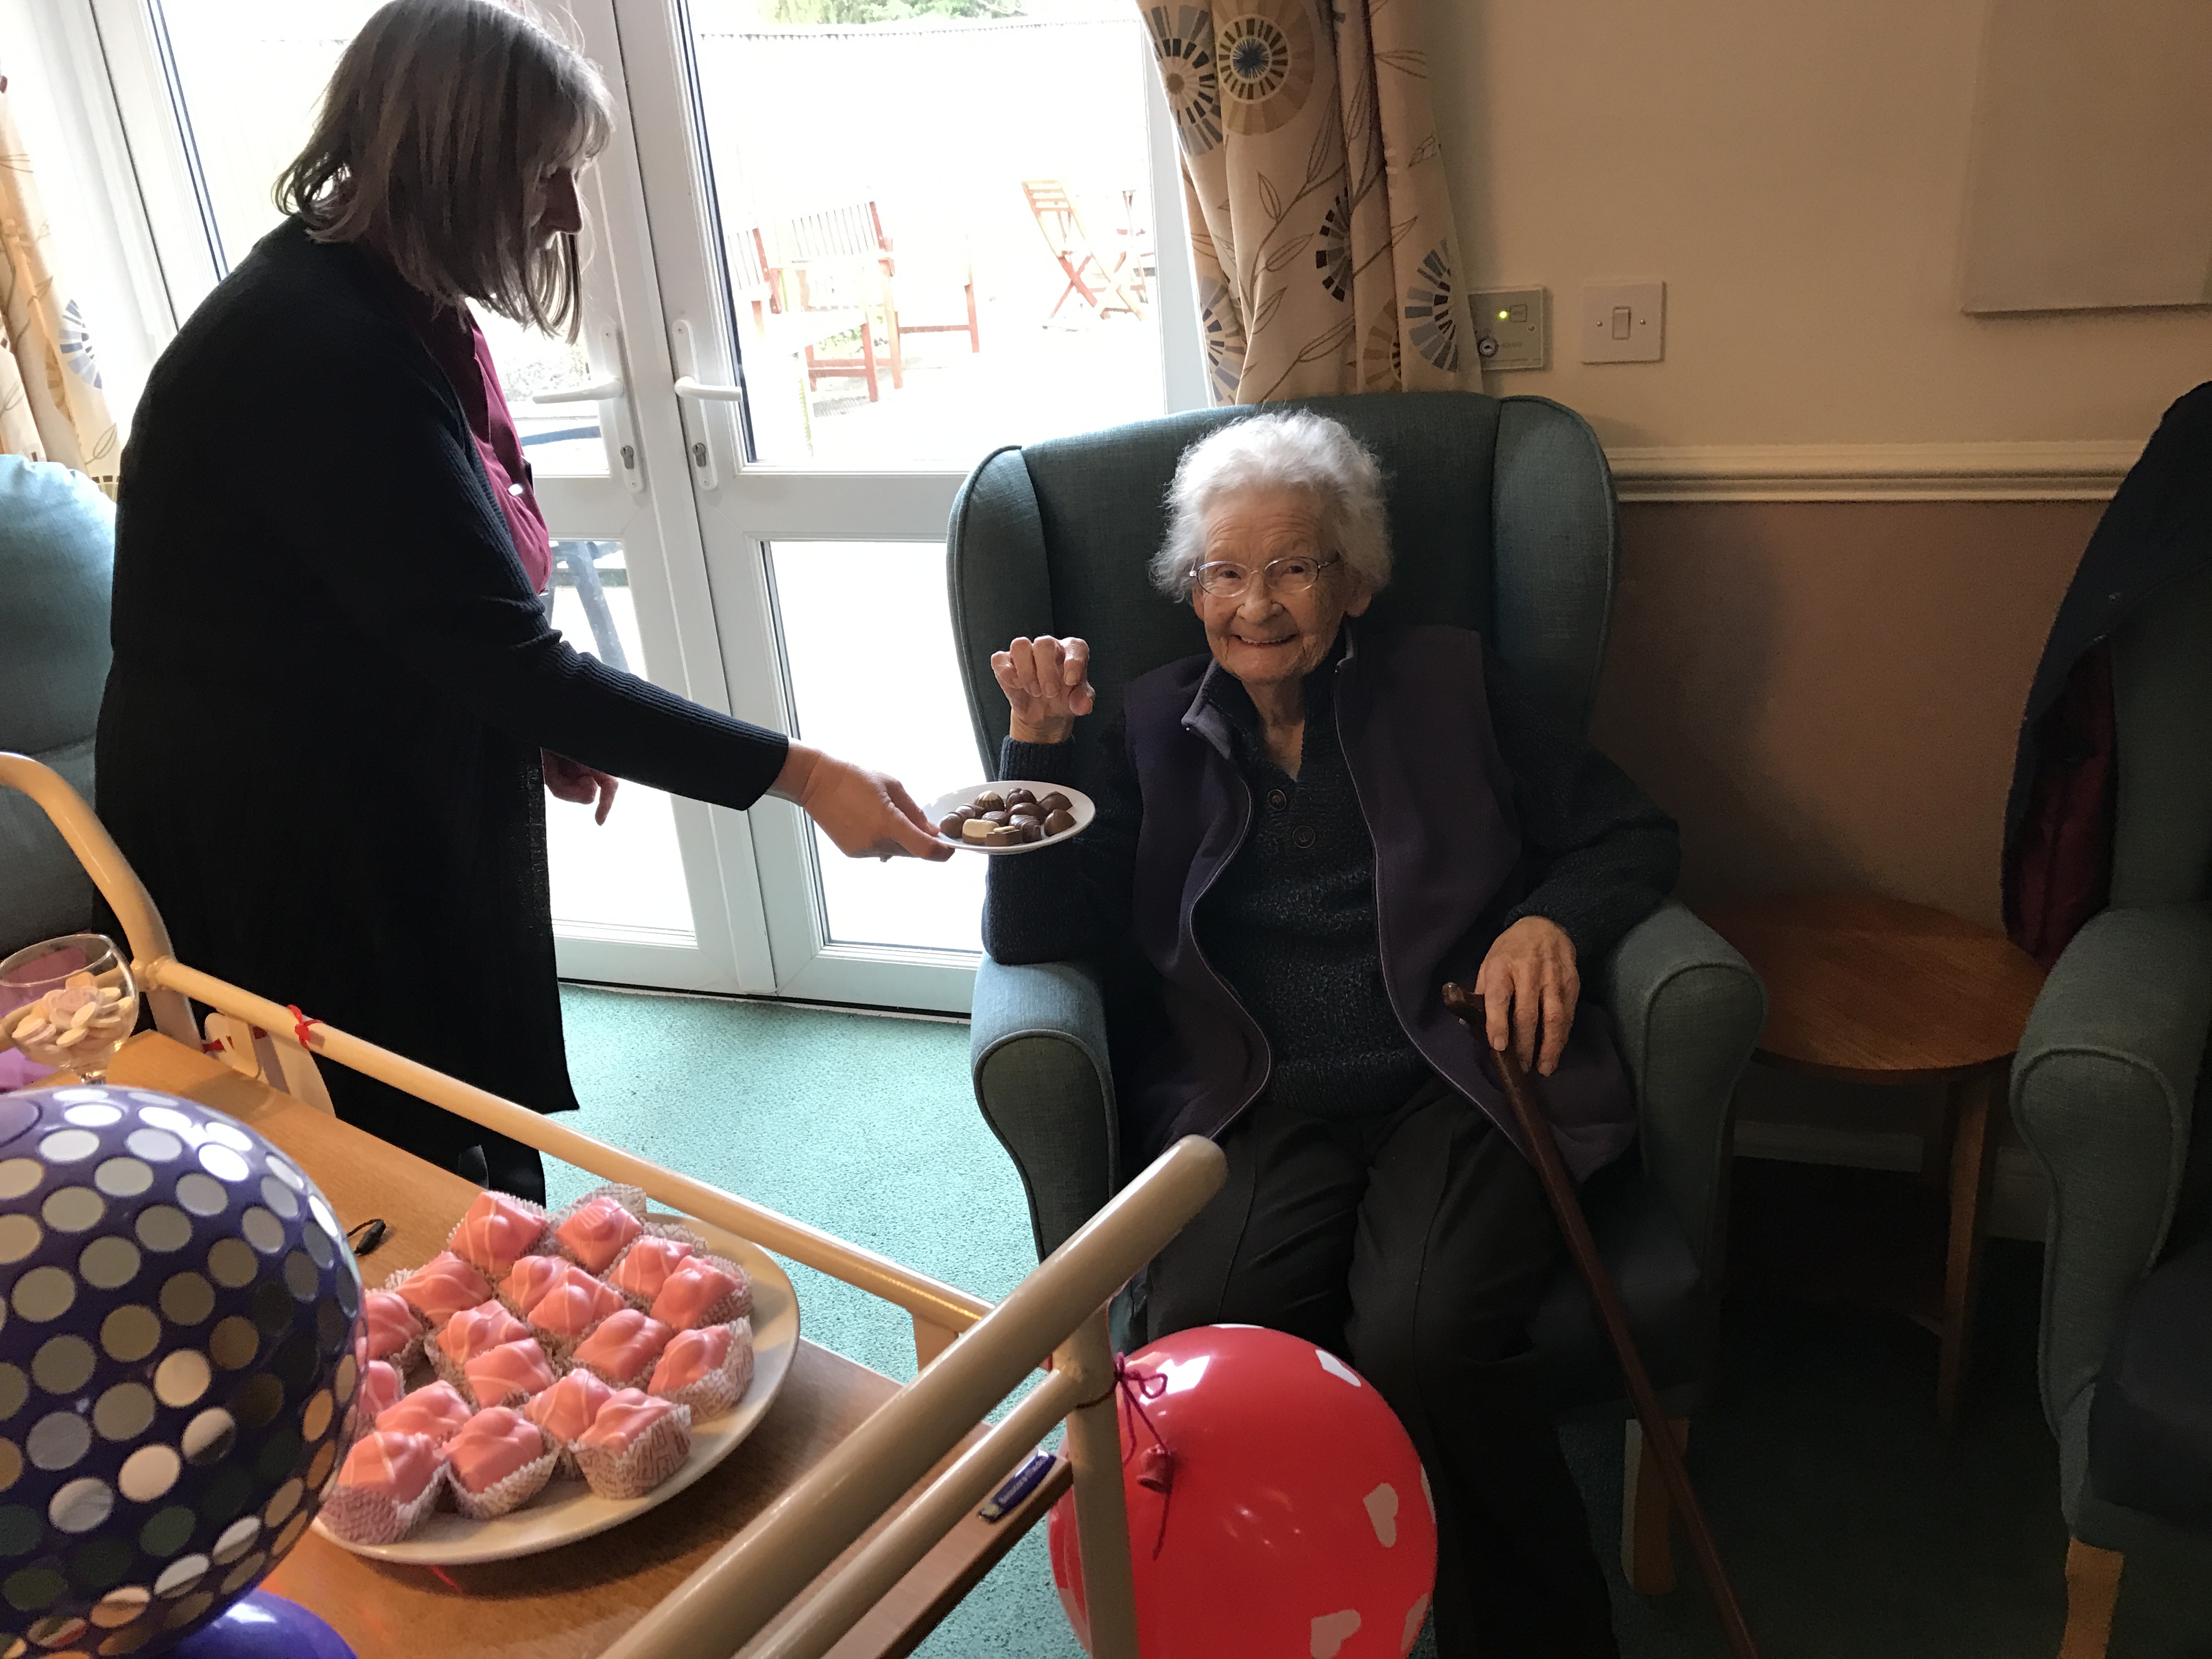 Four Seasons Care Centre celebrates Valentines Day: Key Healthcare is dedicated to caring for elderly residents in safe. We have multiple dementia care homes including our care home middlesbrough, our care home St. Helen and care home saltburn. We excel in monitoring and improving care levels.